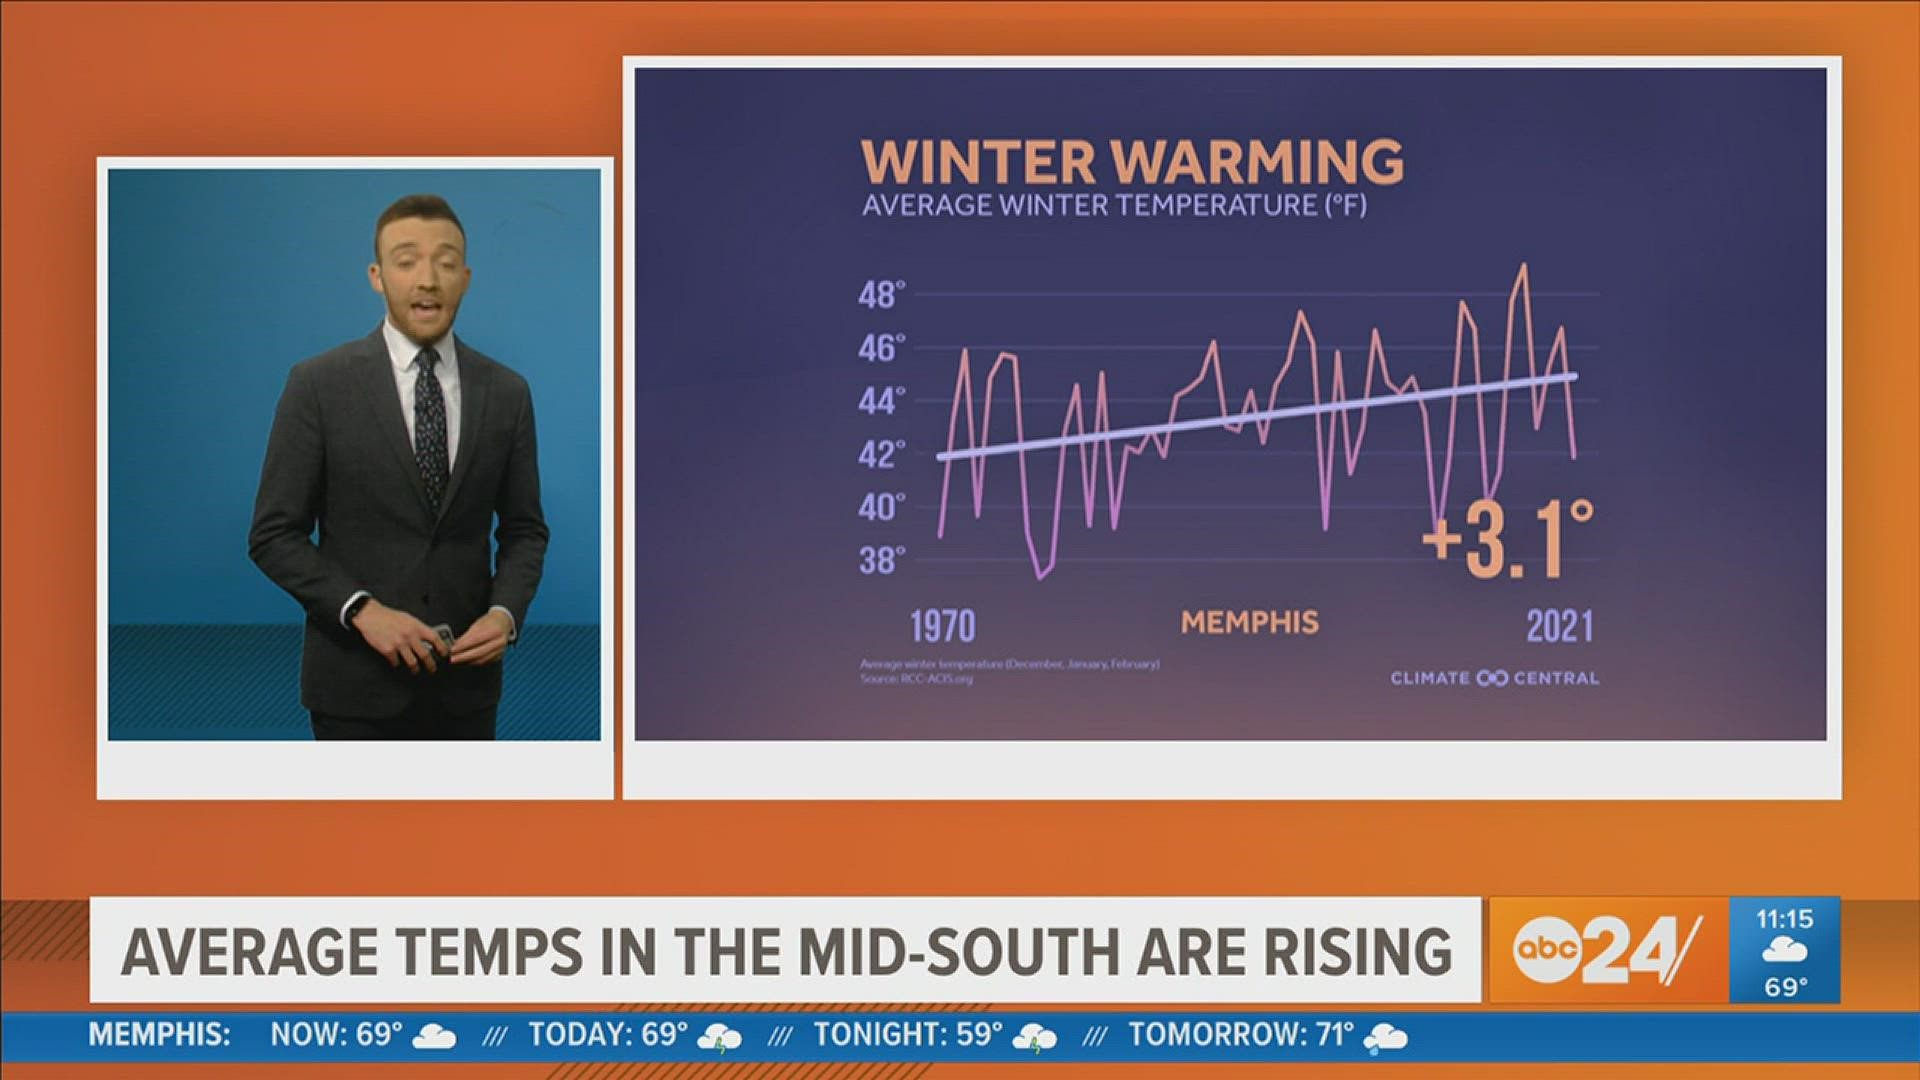 A new report shows the average temperature in the winter months in the Mid-South continues to climb.